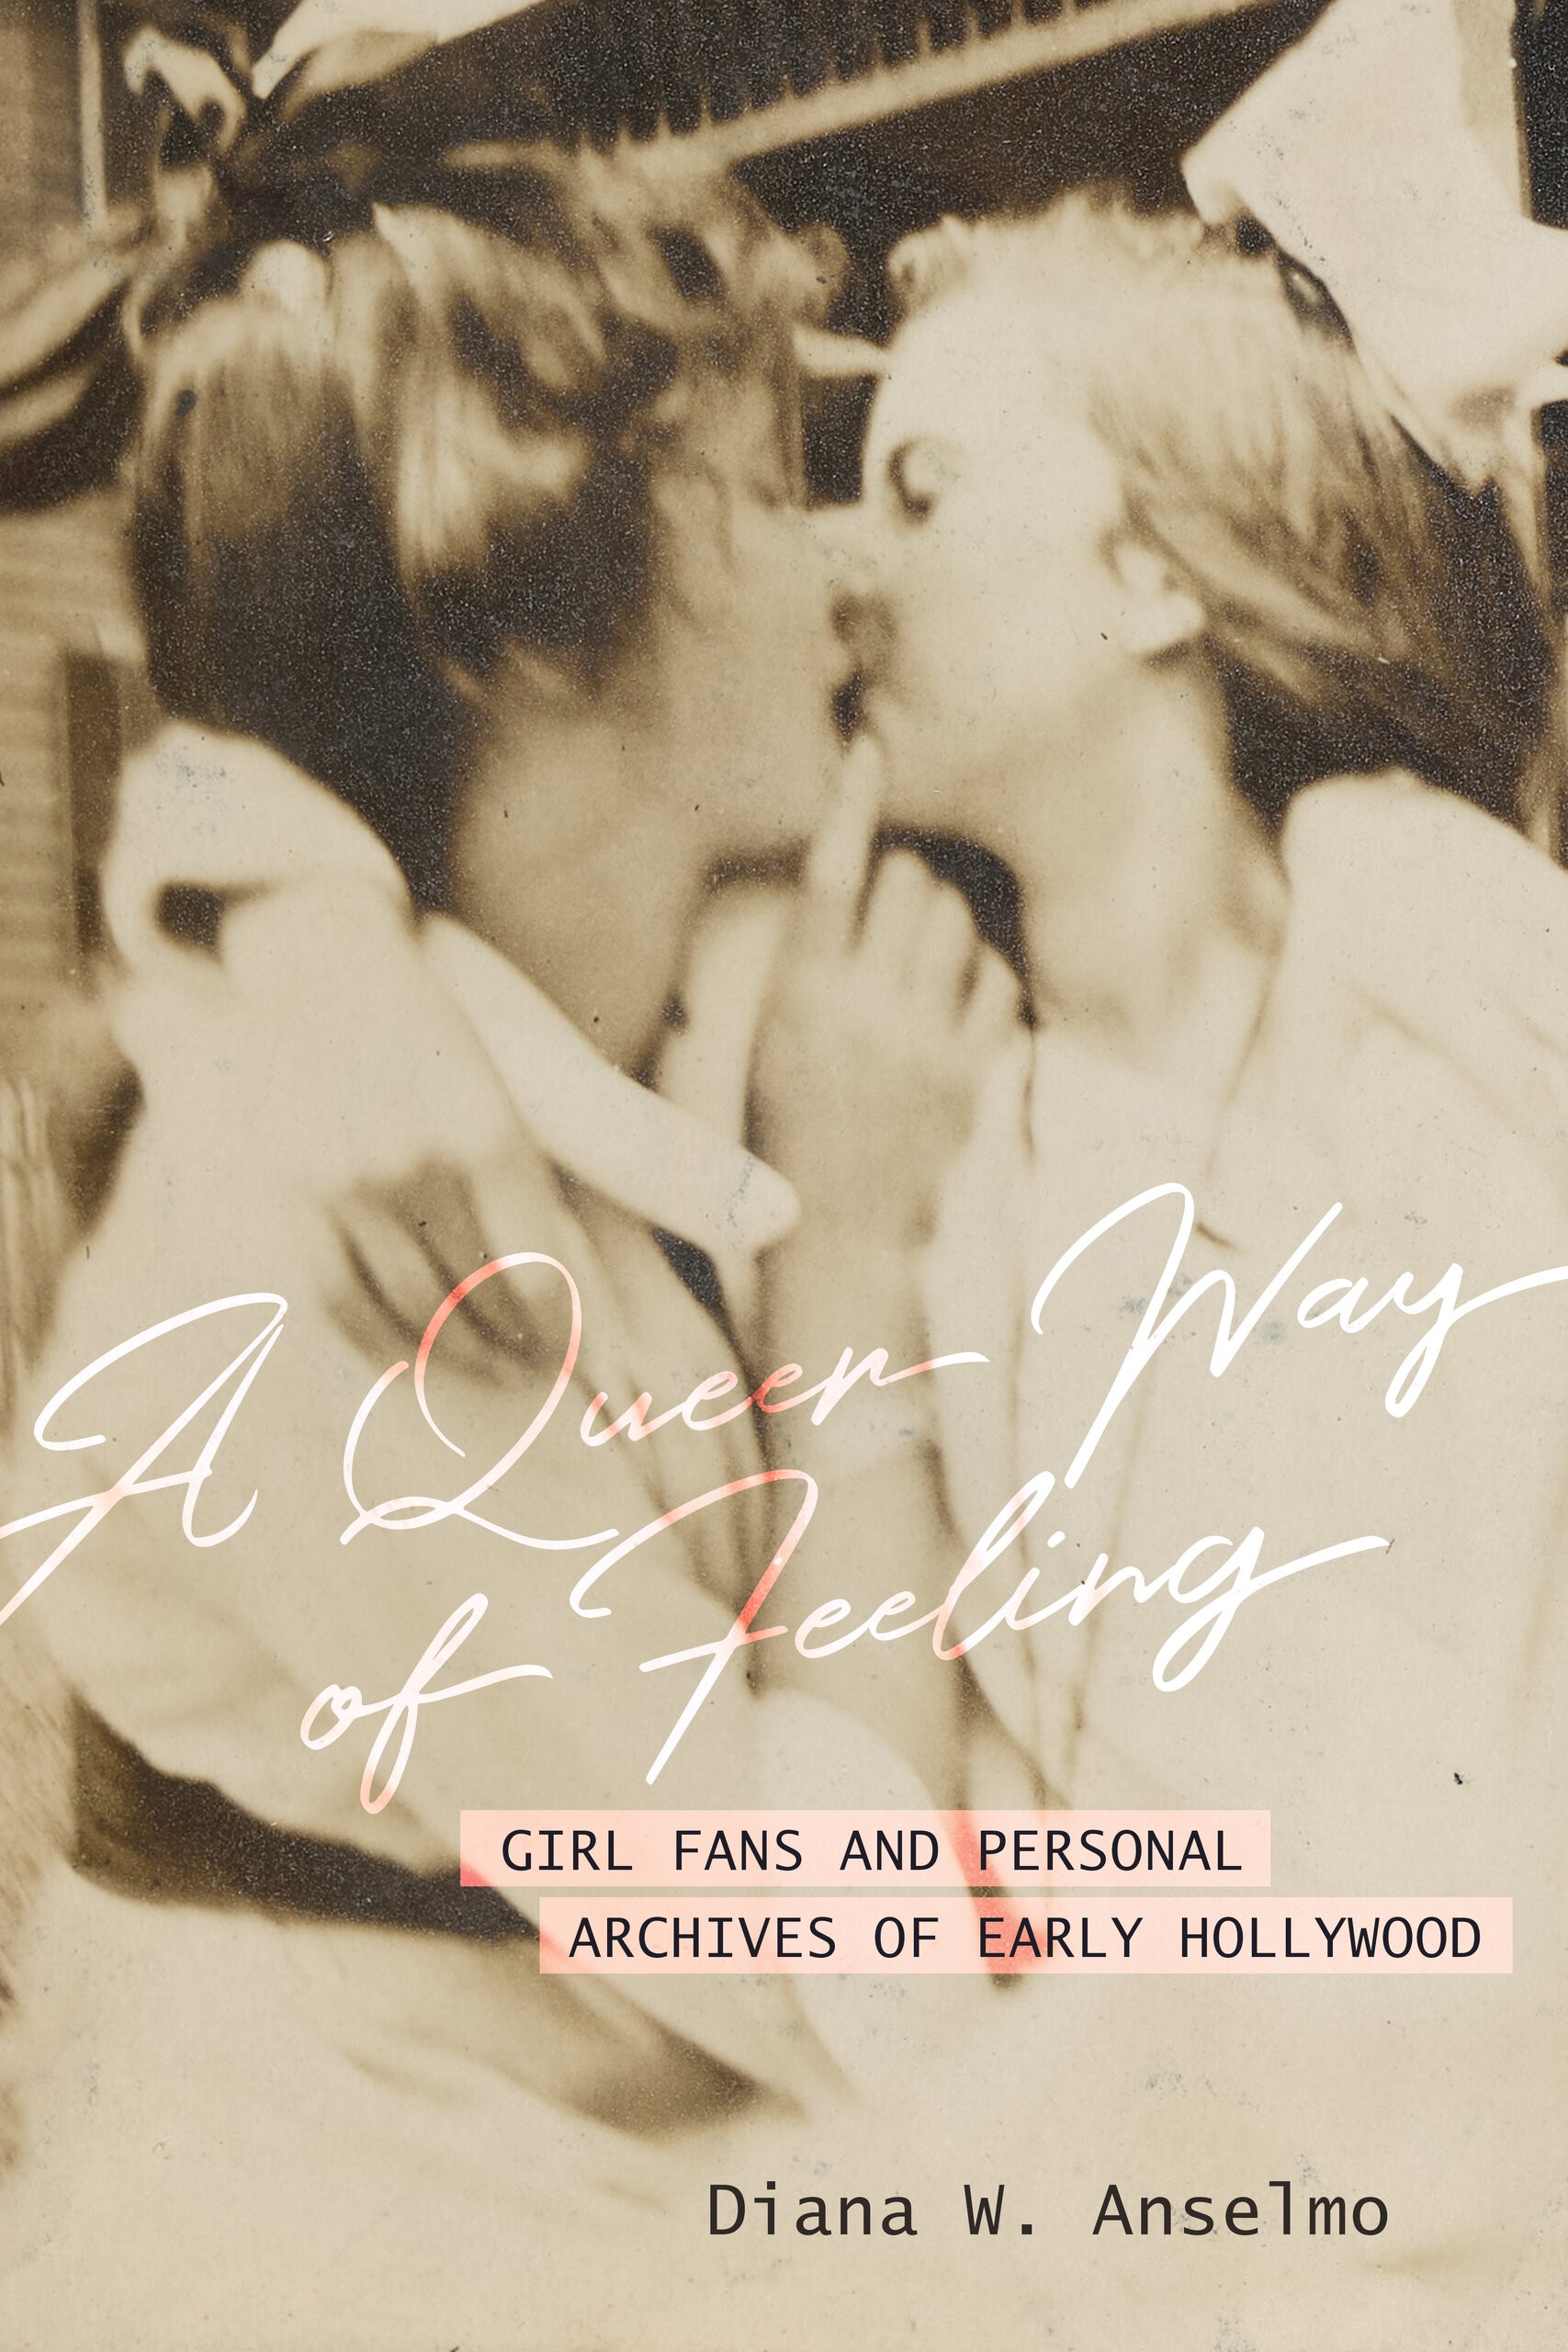 A Queer Way of Feeling; Girl Fans and Personal Archives of Early Hollywood book cover